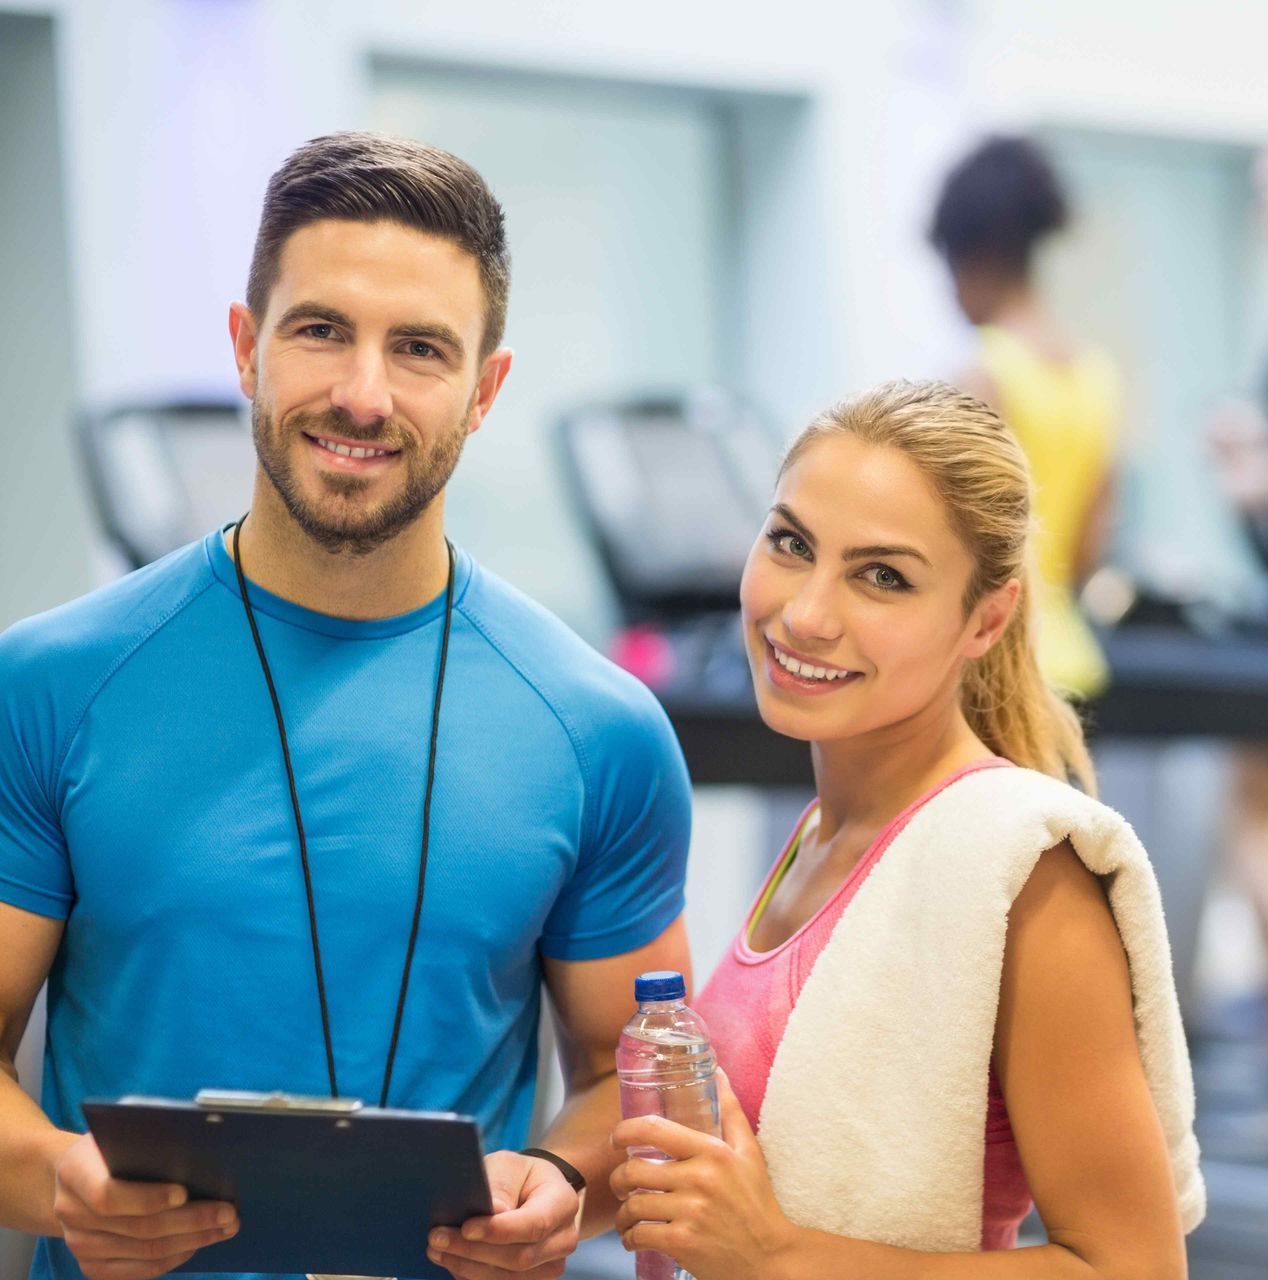 Male Personal Trainer with Female Client